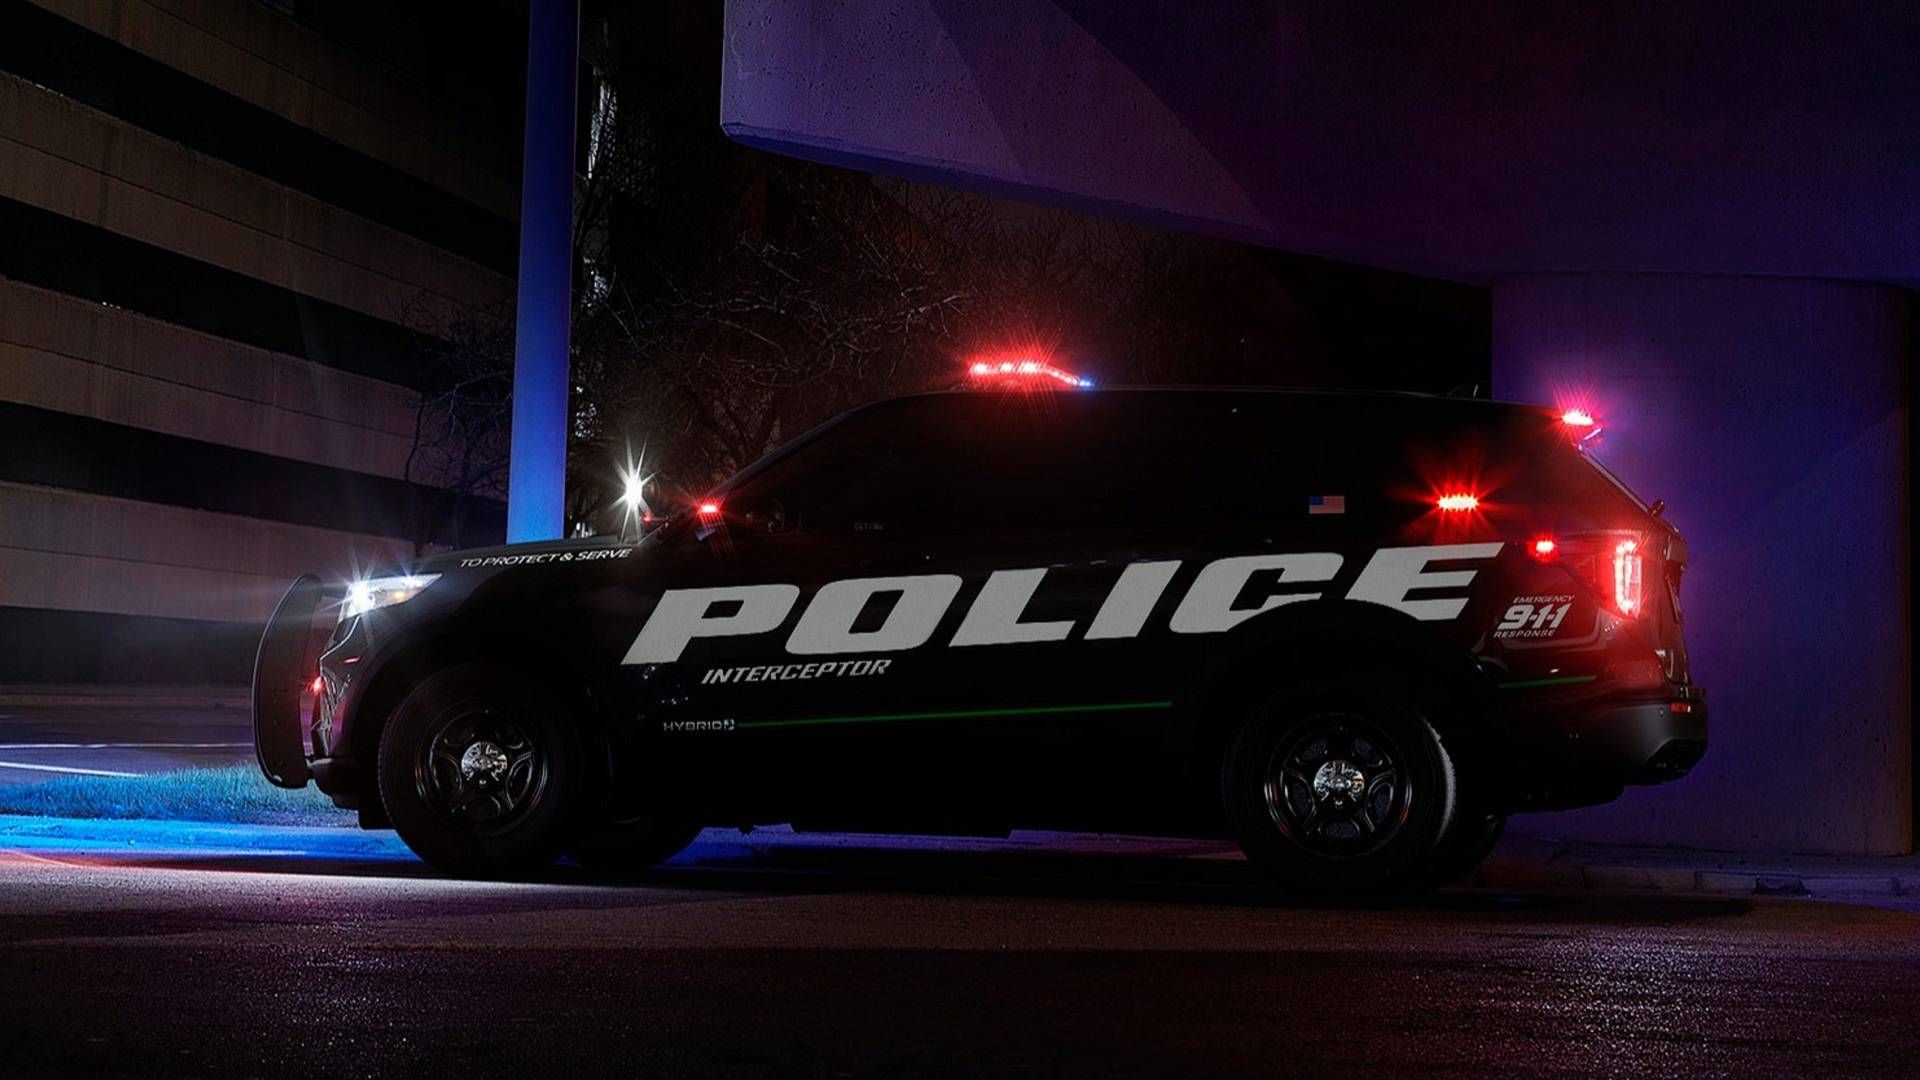 This 2020 Ford Police Interceptor Utility Is The Fastest Law Enforcement Vehicle Of All Time